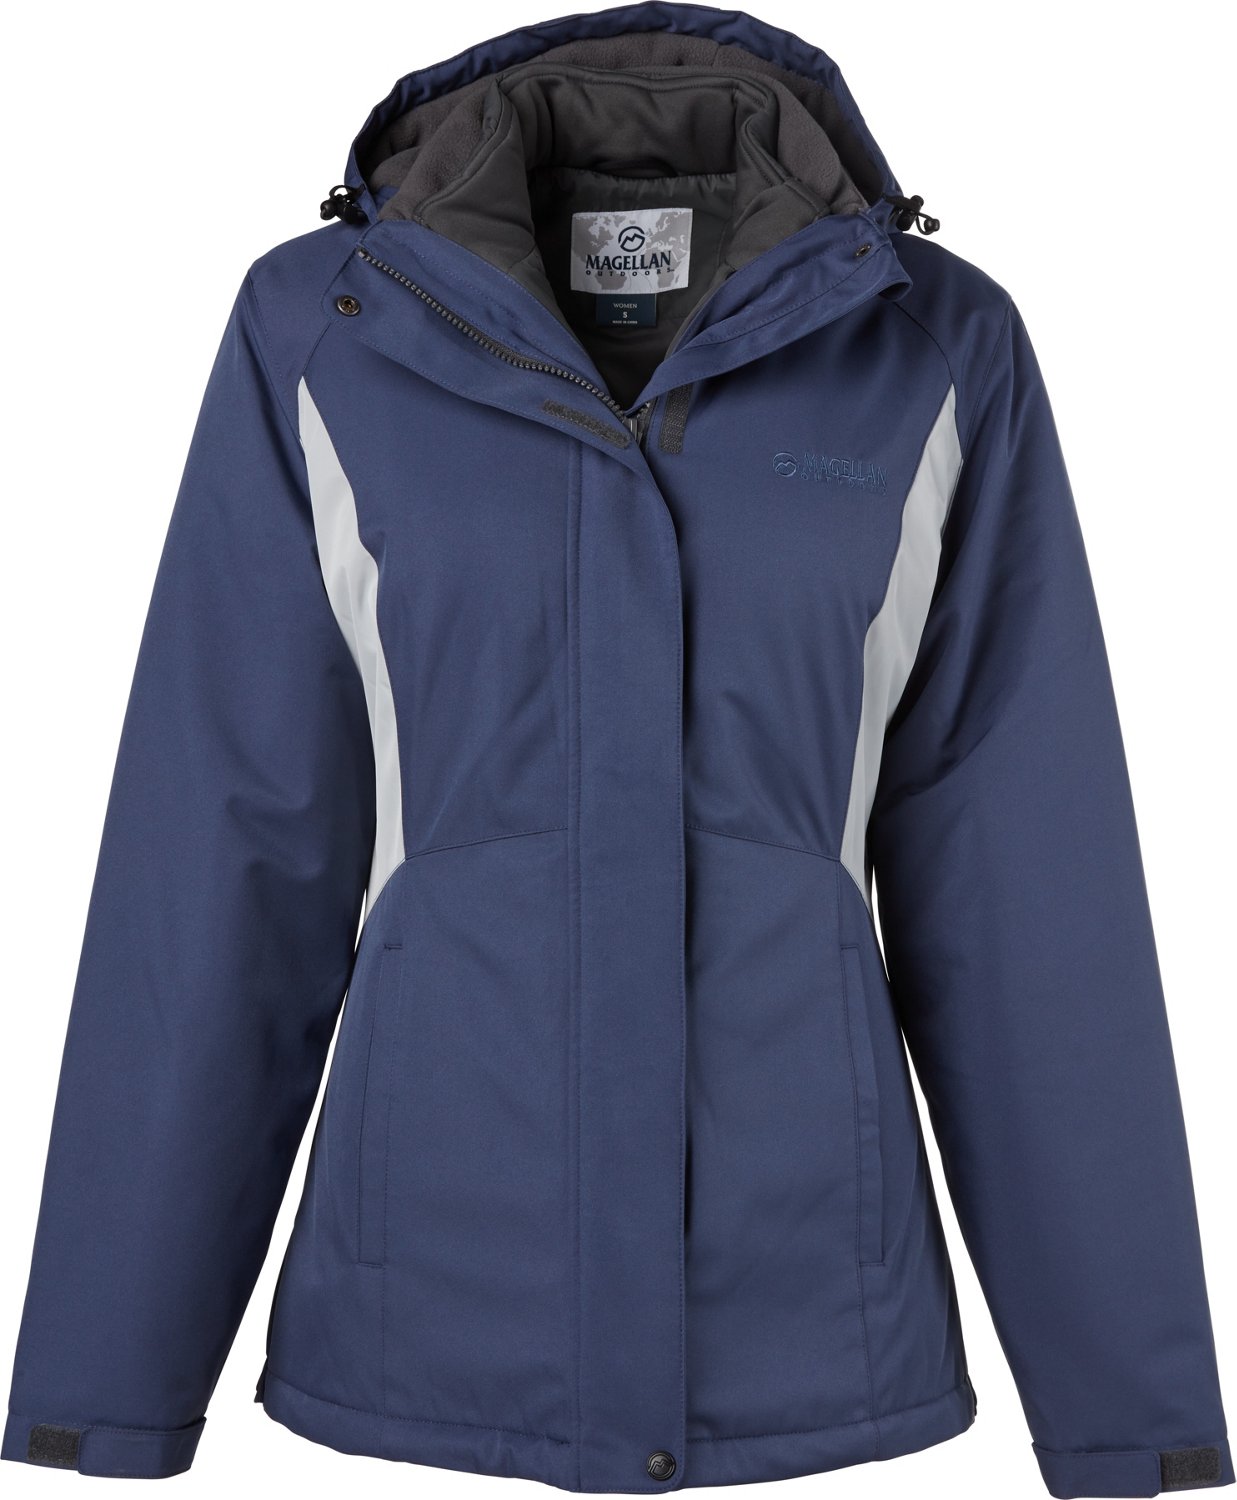 Magellan Outdoors Women's Systems 3-in-1 Dark Blue or Charcoal Jacket $60.75